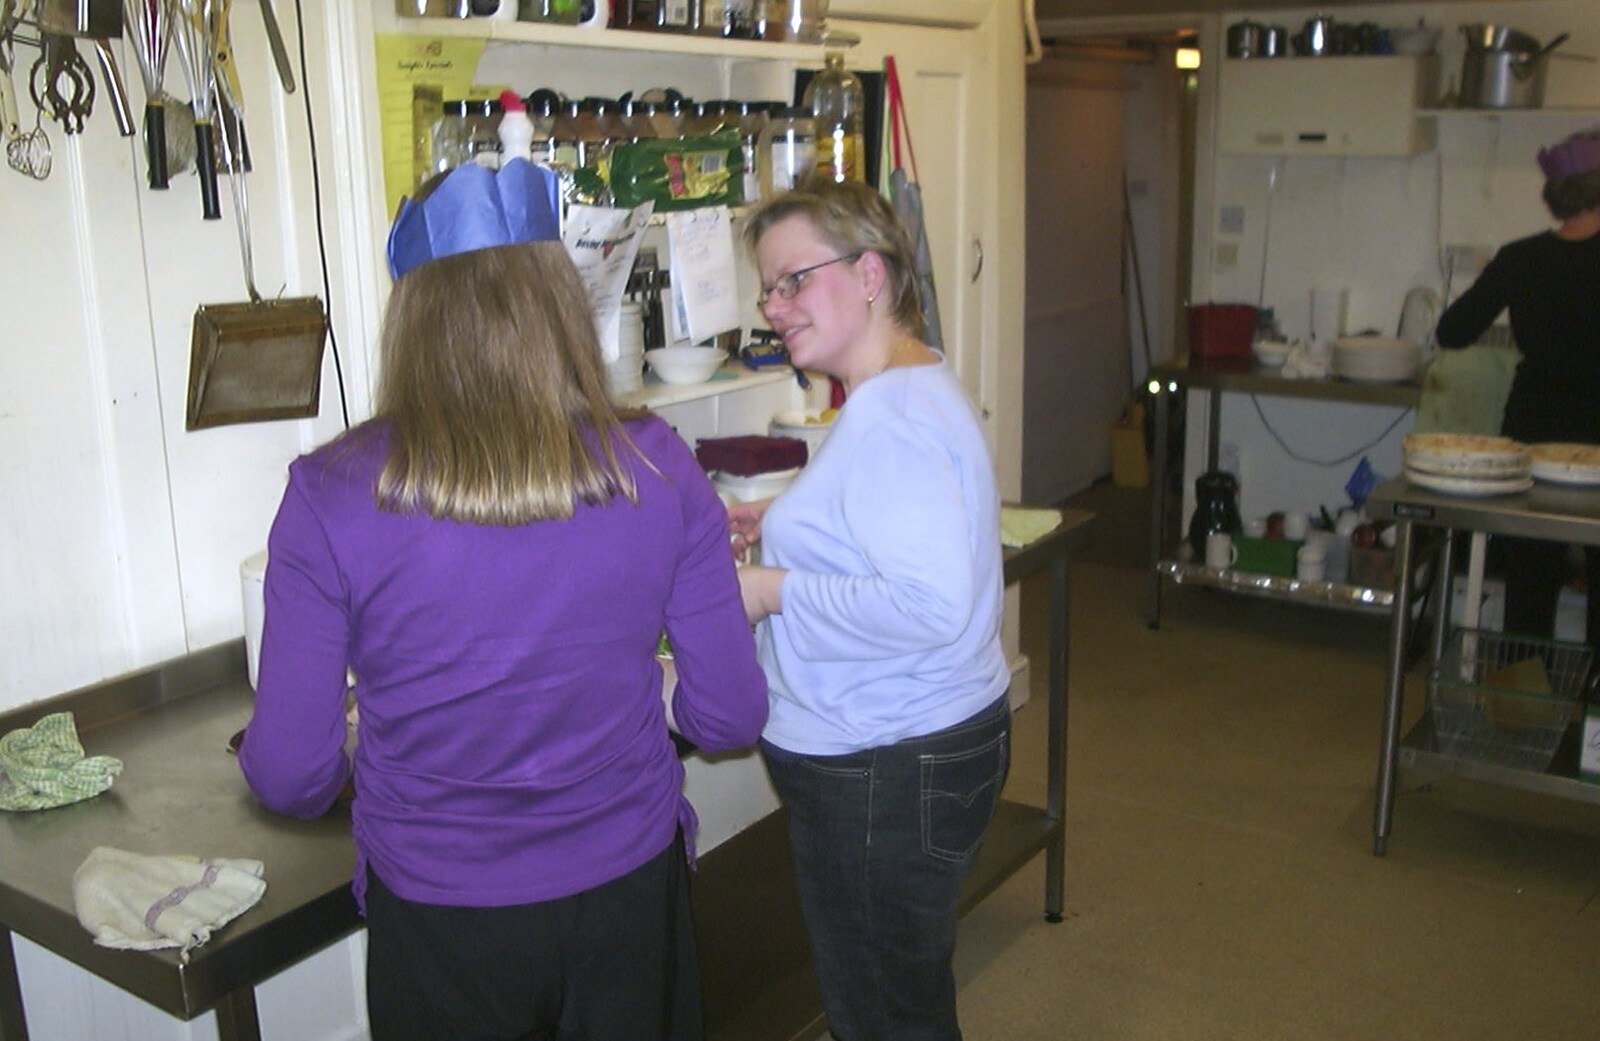 Lorraine in the kitchen from Christmas at The Cottage, Thorpe St. Andrew, Norwich - 25th December 2003